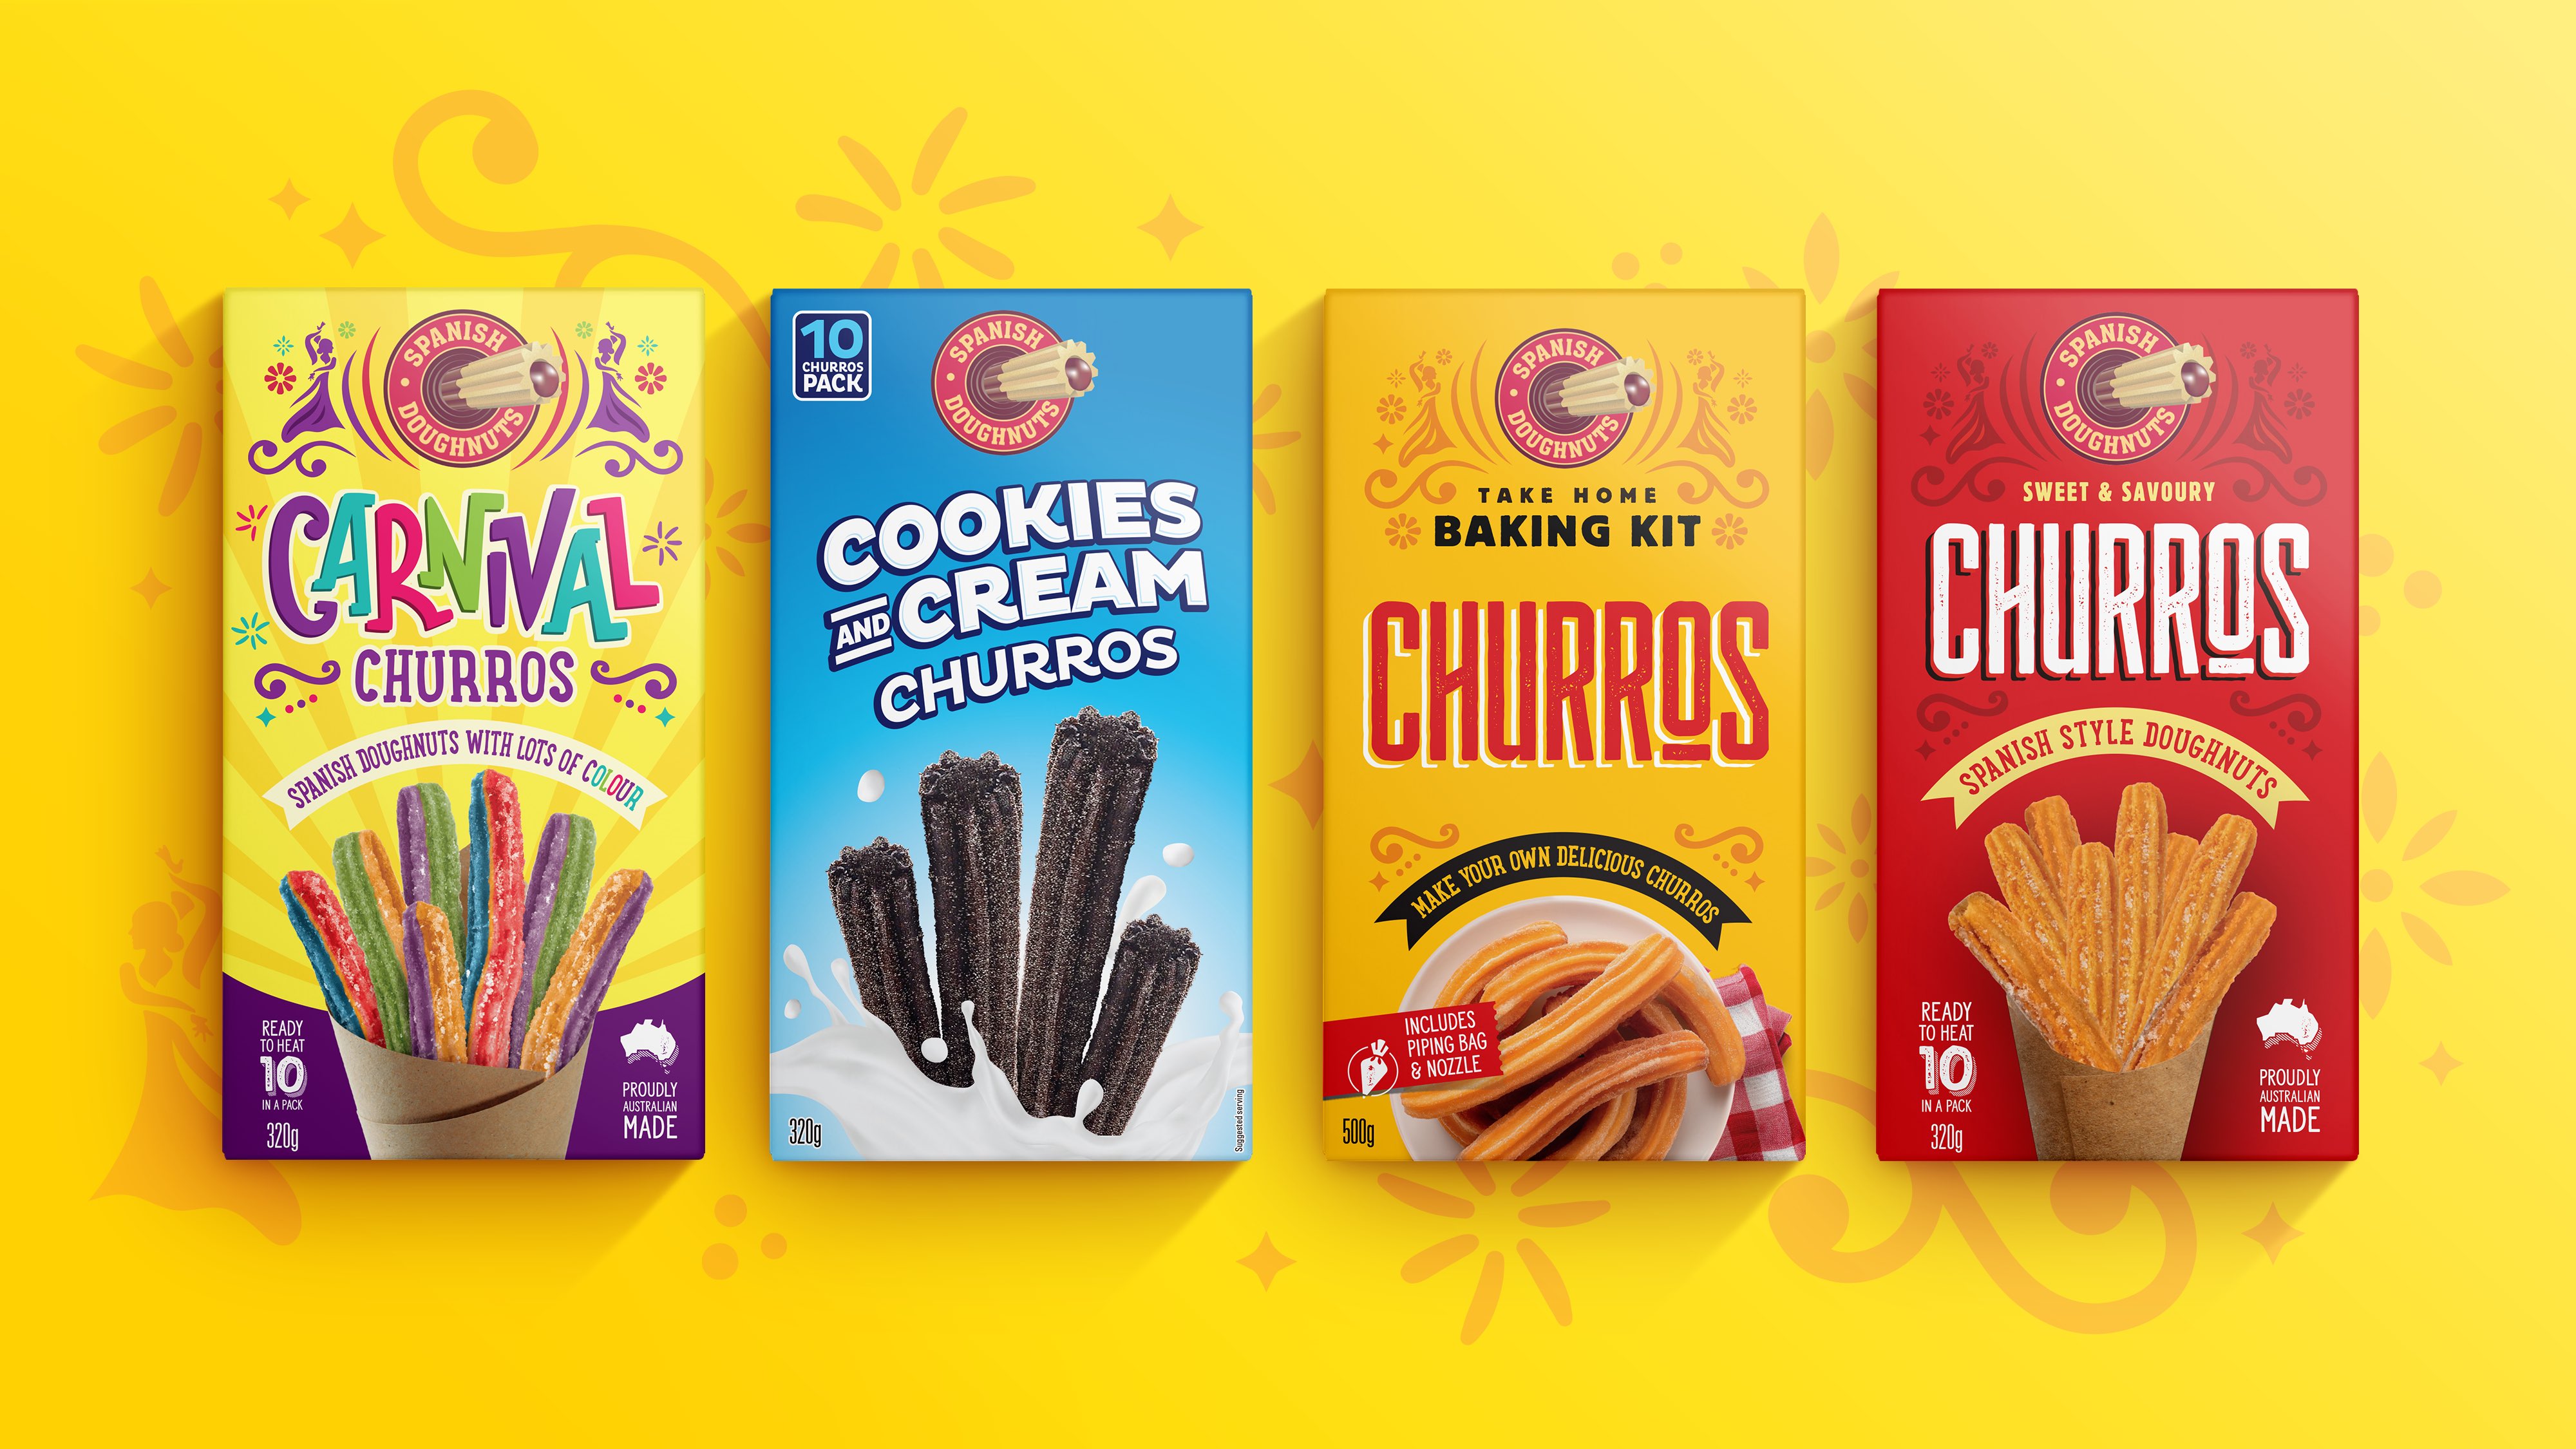 Relax Design’s Creative Packaging for Spanish Doughnuts’ New Churros Line